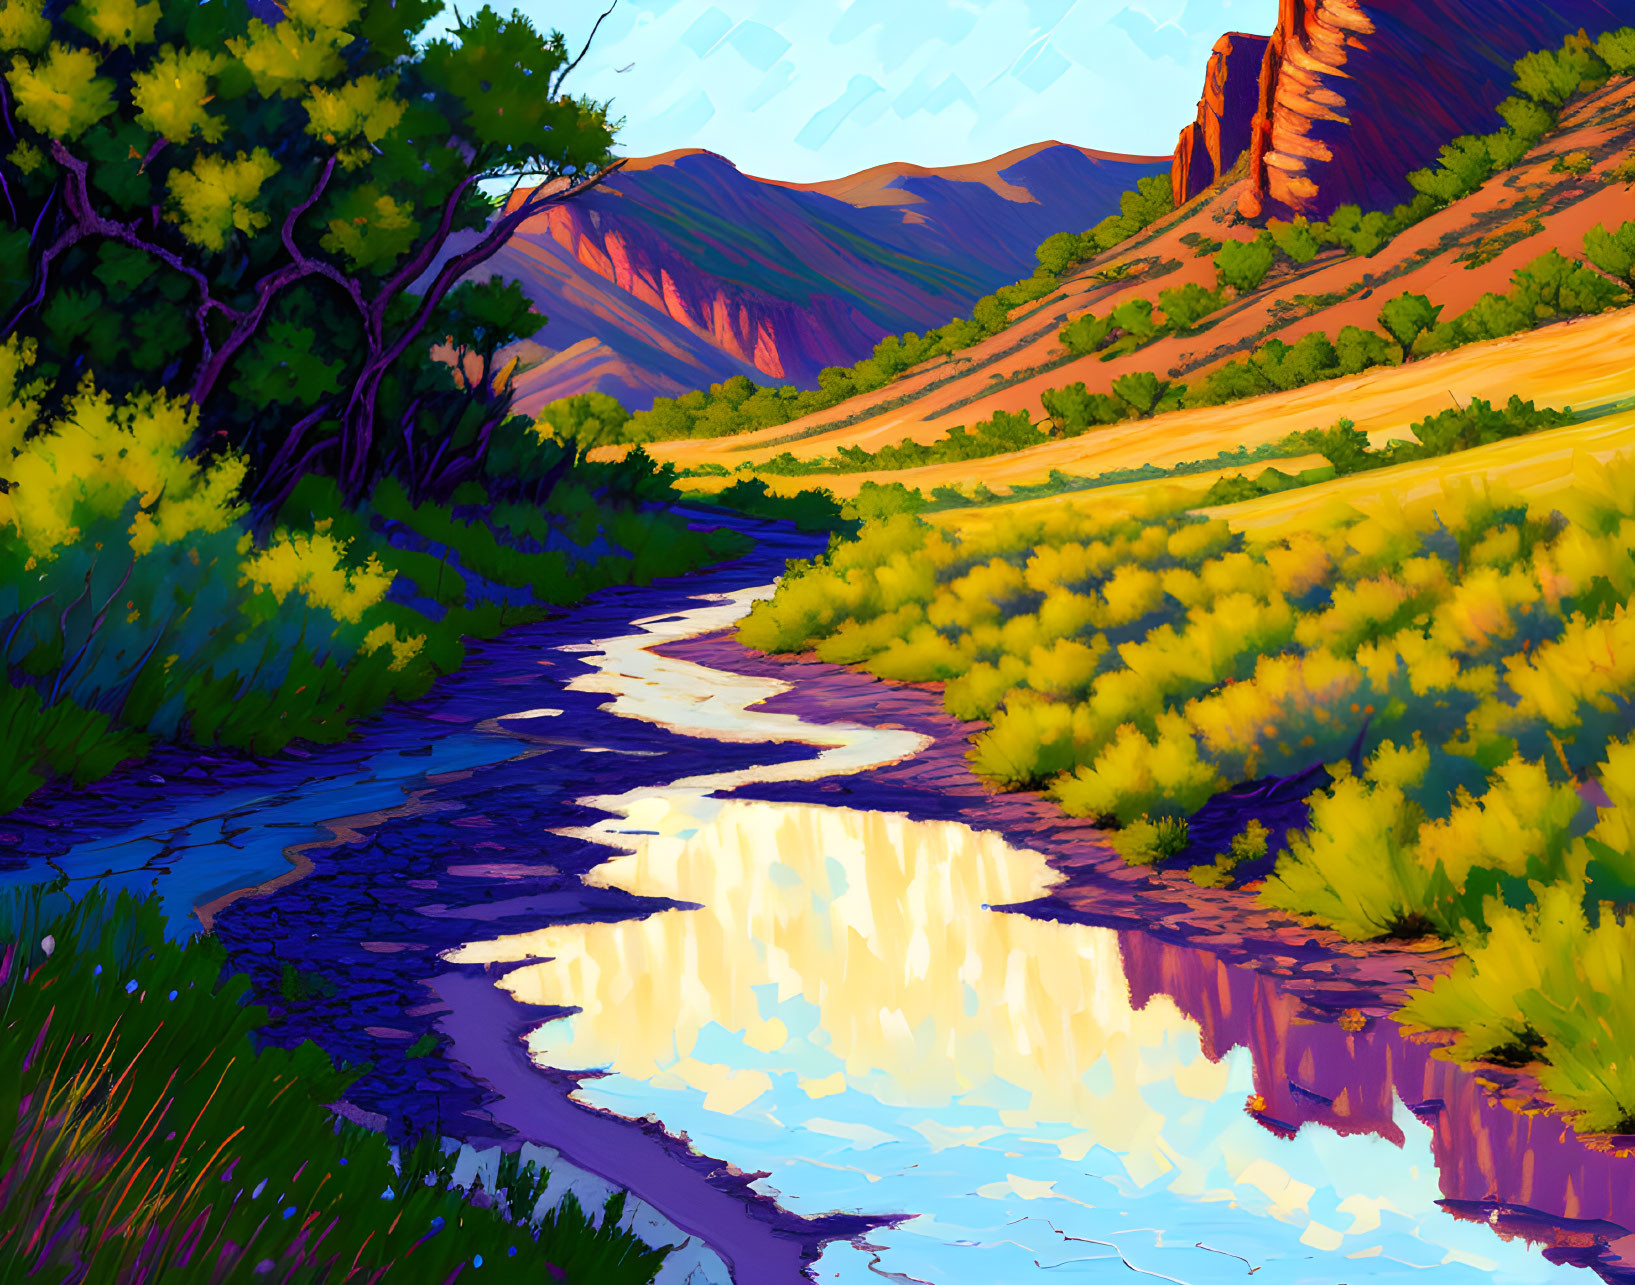 Scenic landscape illustration with winding river, lush vegetation, and mountains